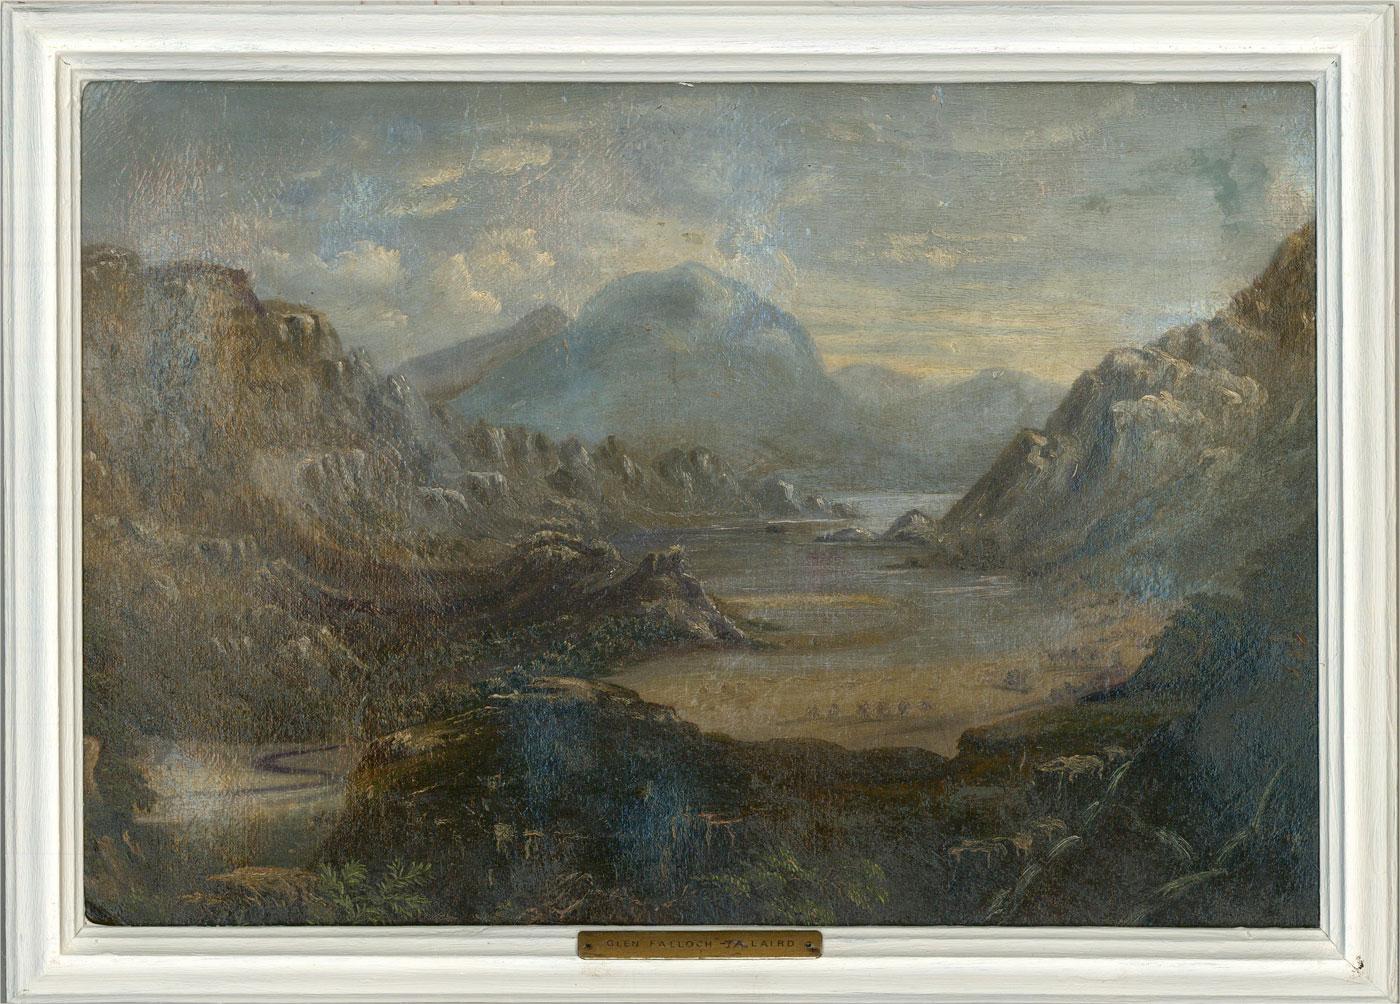 An expansive panoramic view of Perthshire, Scotland. The hill top view shows the winding river leading into the Loch in the foothills of a mountain range. The artist has signed at the reverse of the board. The painting is presented in a white